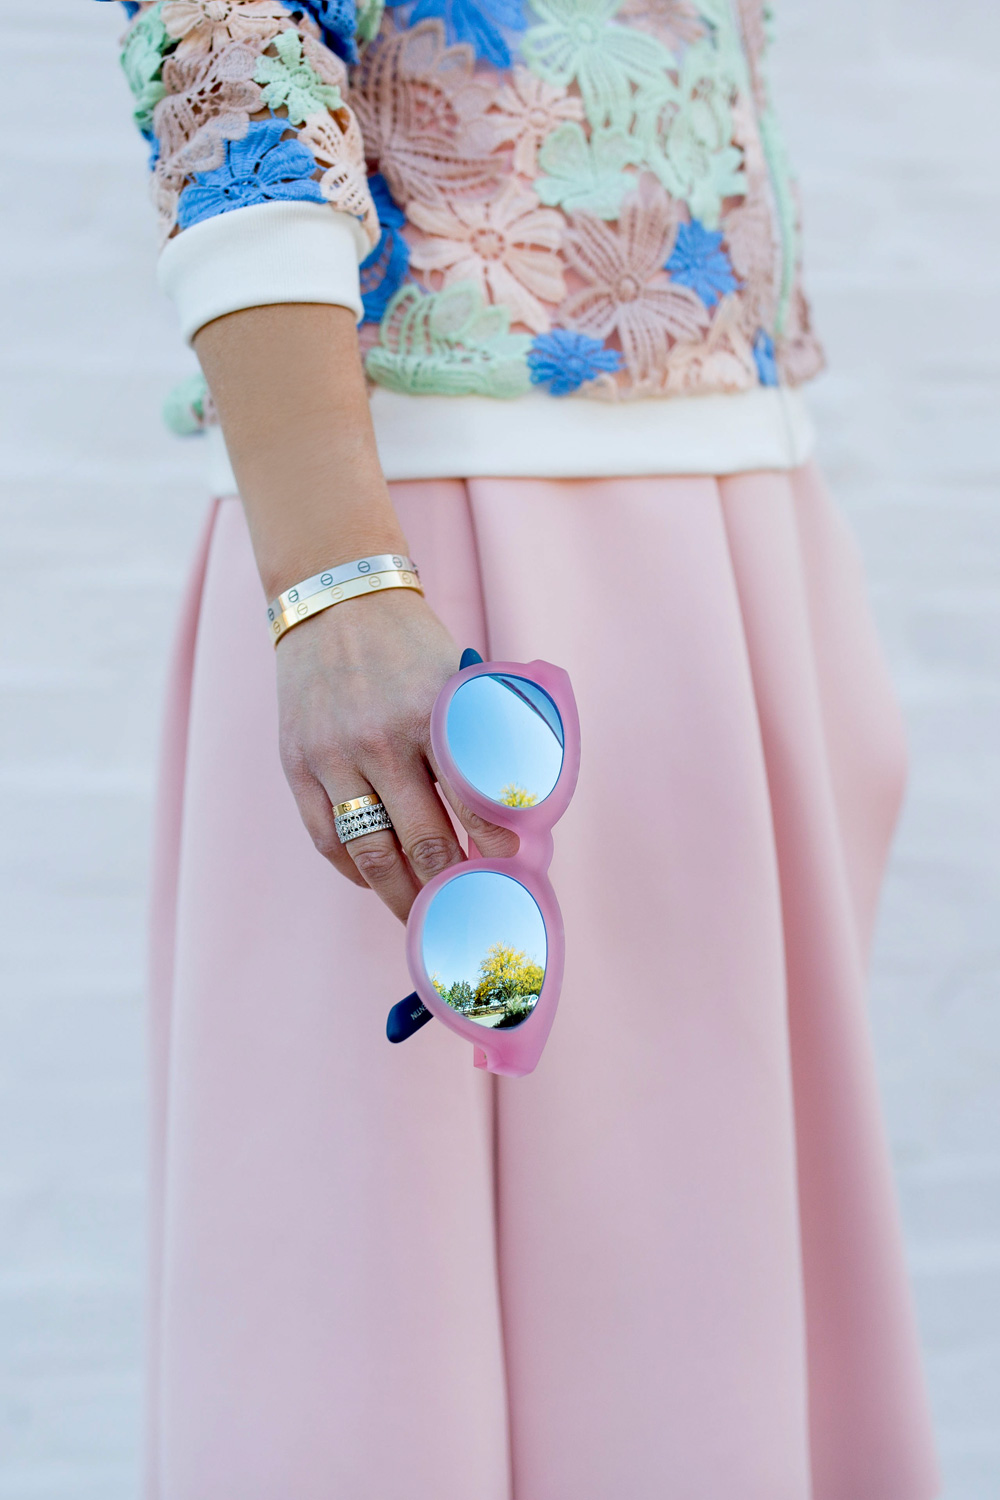 Jennifer Lake Style Charade in a Nordstrom pastel lace bomber jacket, pink skirt, and pink Packed Party Toms sunglasses